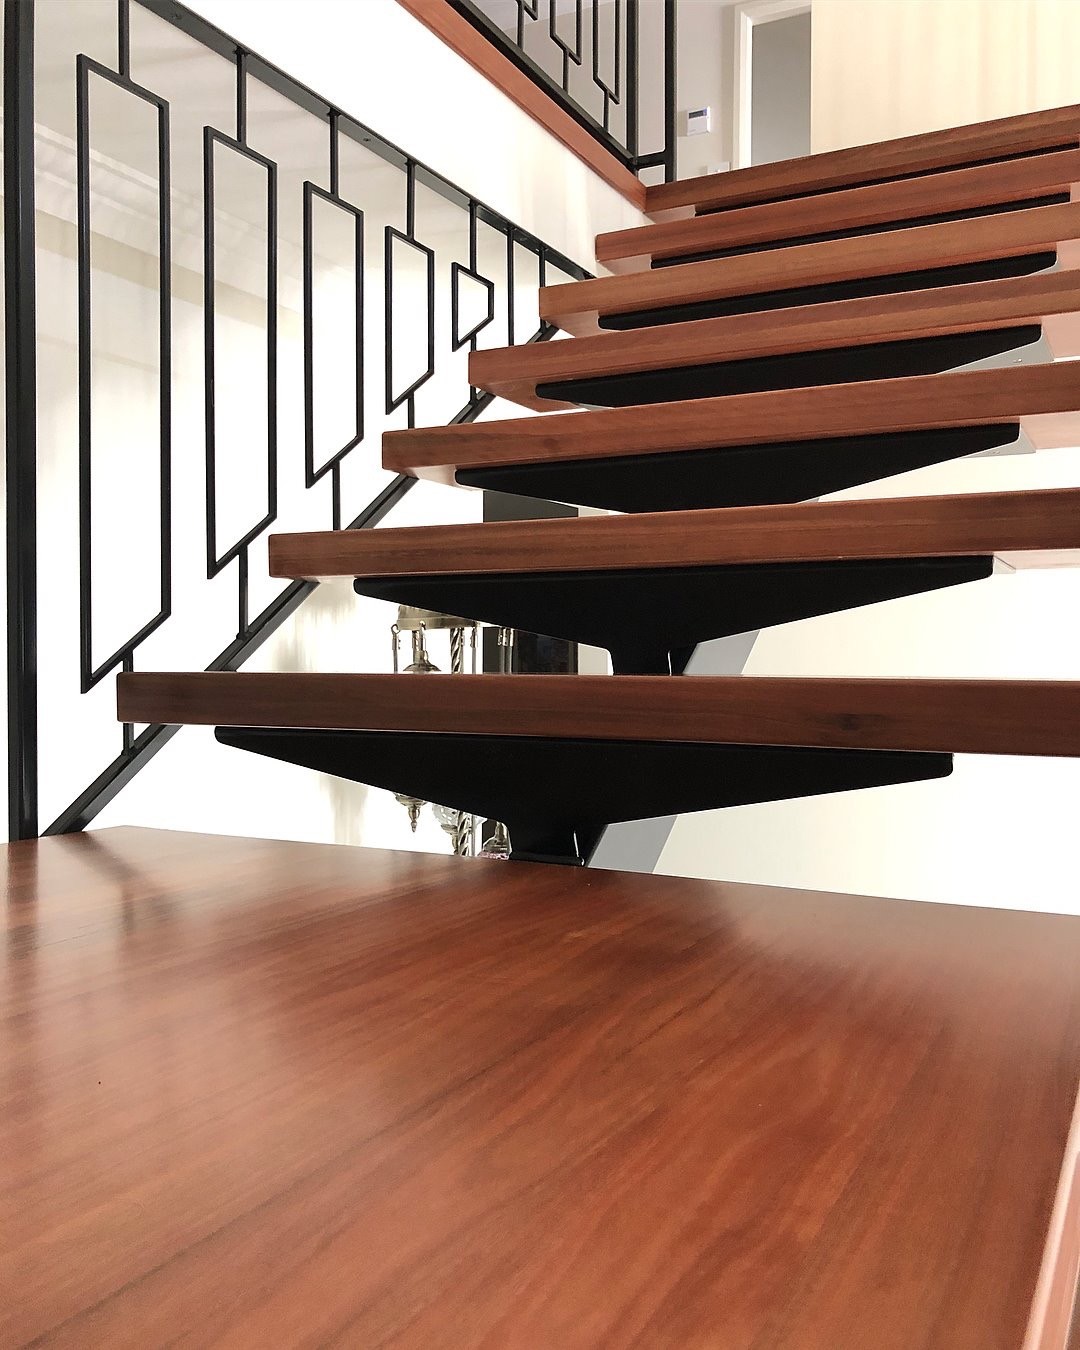 Designer Staircase Monostringer steel spine staircase with solid Australian Hardwood tread, metal Baluster and Hardwood handmade handrail supplied and installed by Timber Floors Pty Ltd